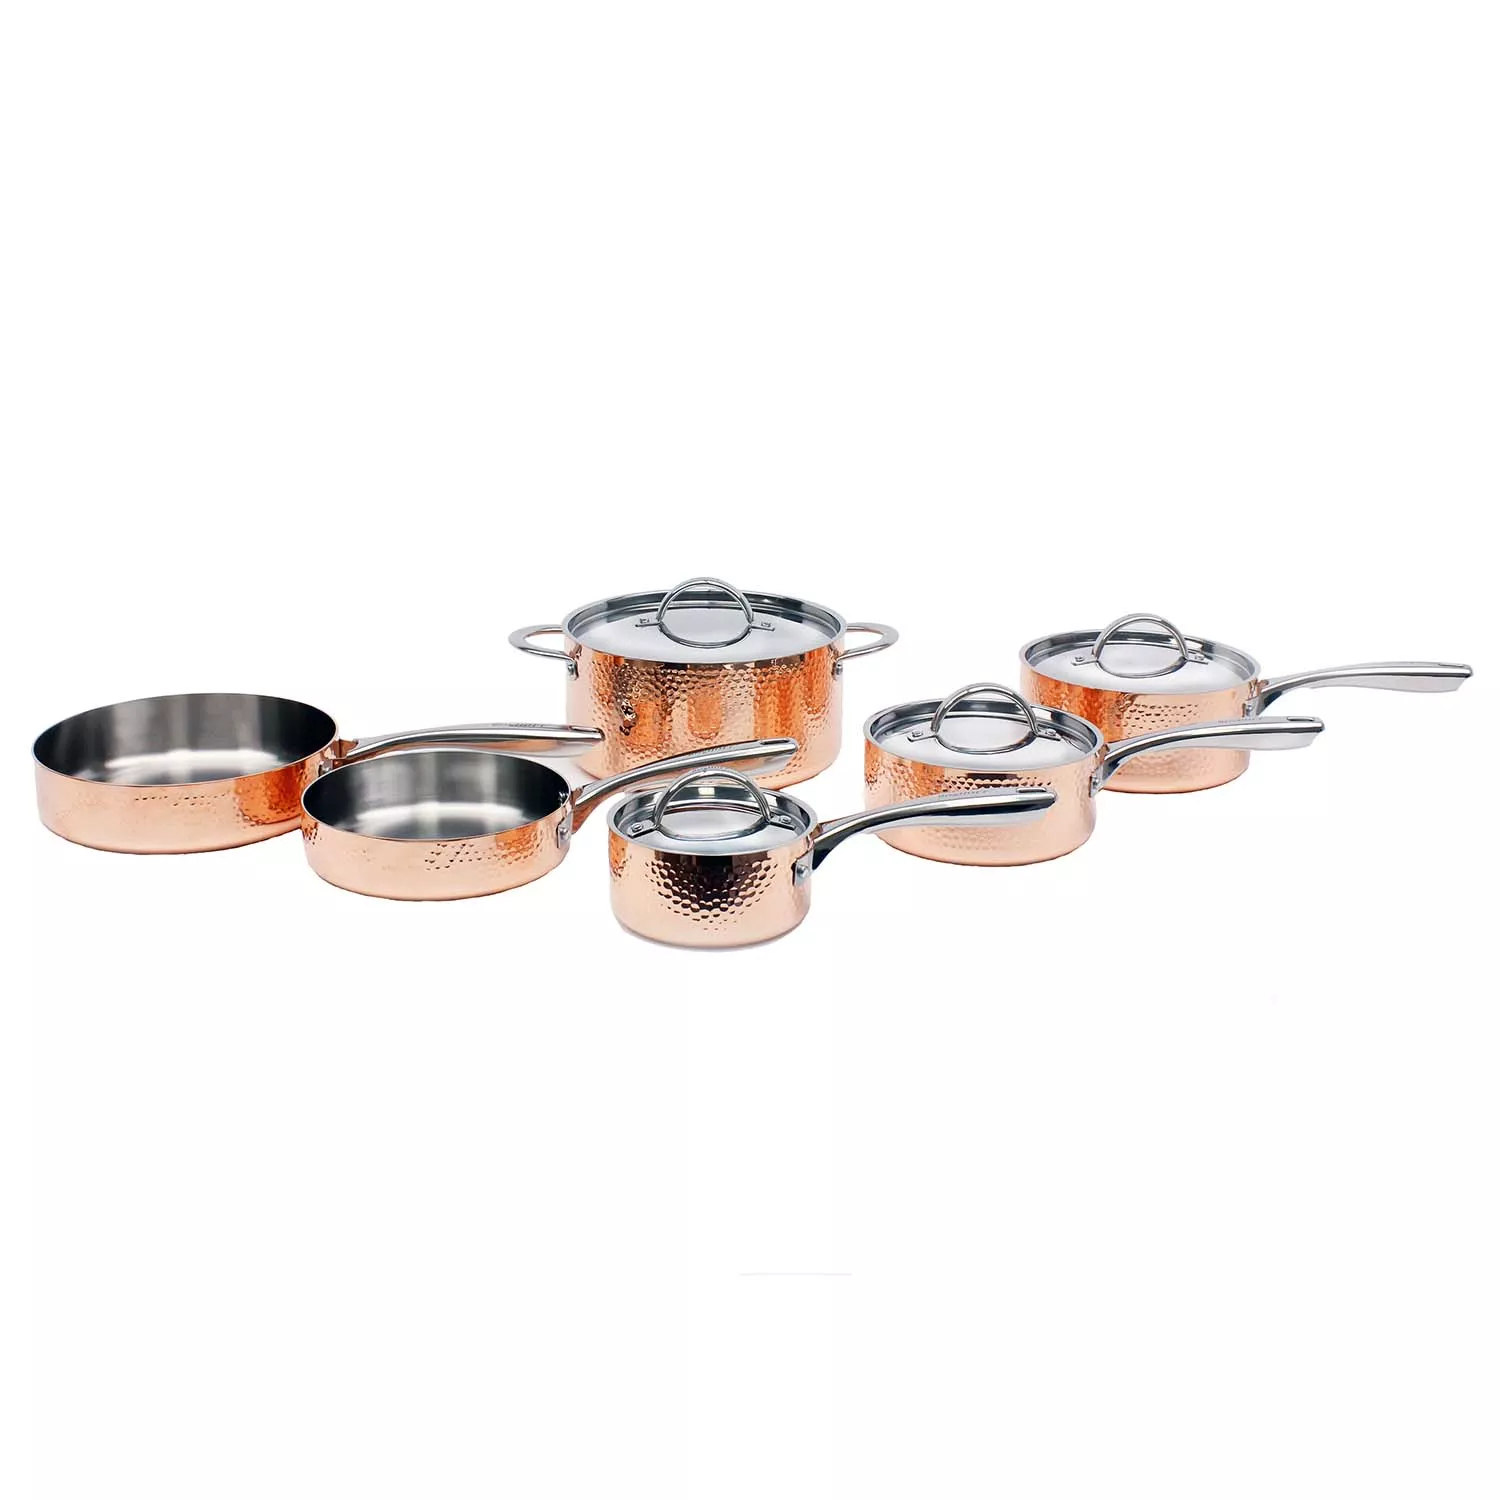 Hastings Home Nonstick, Dishwasher Safe, Oven Safe Cookware Set With  Tempered Glass Lid - Copper, 8 Pieces